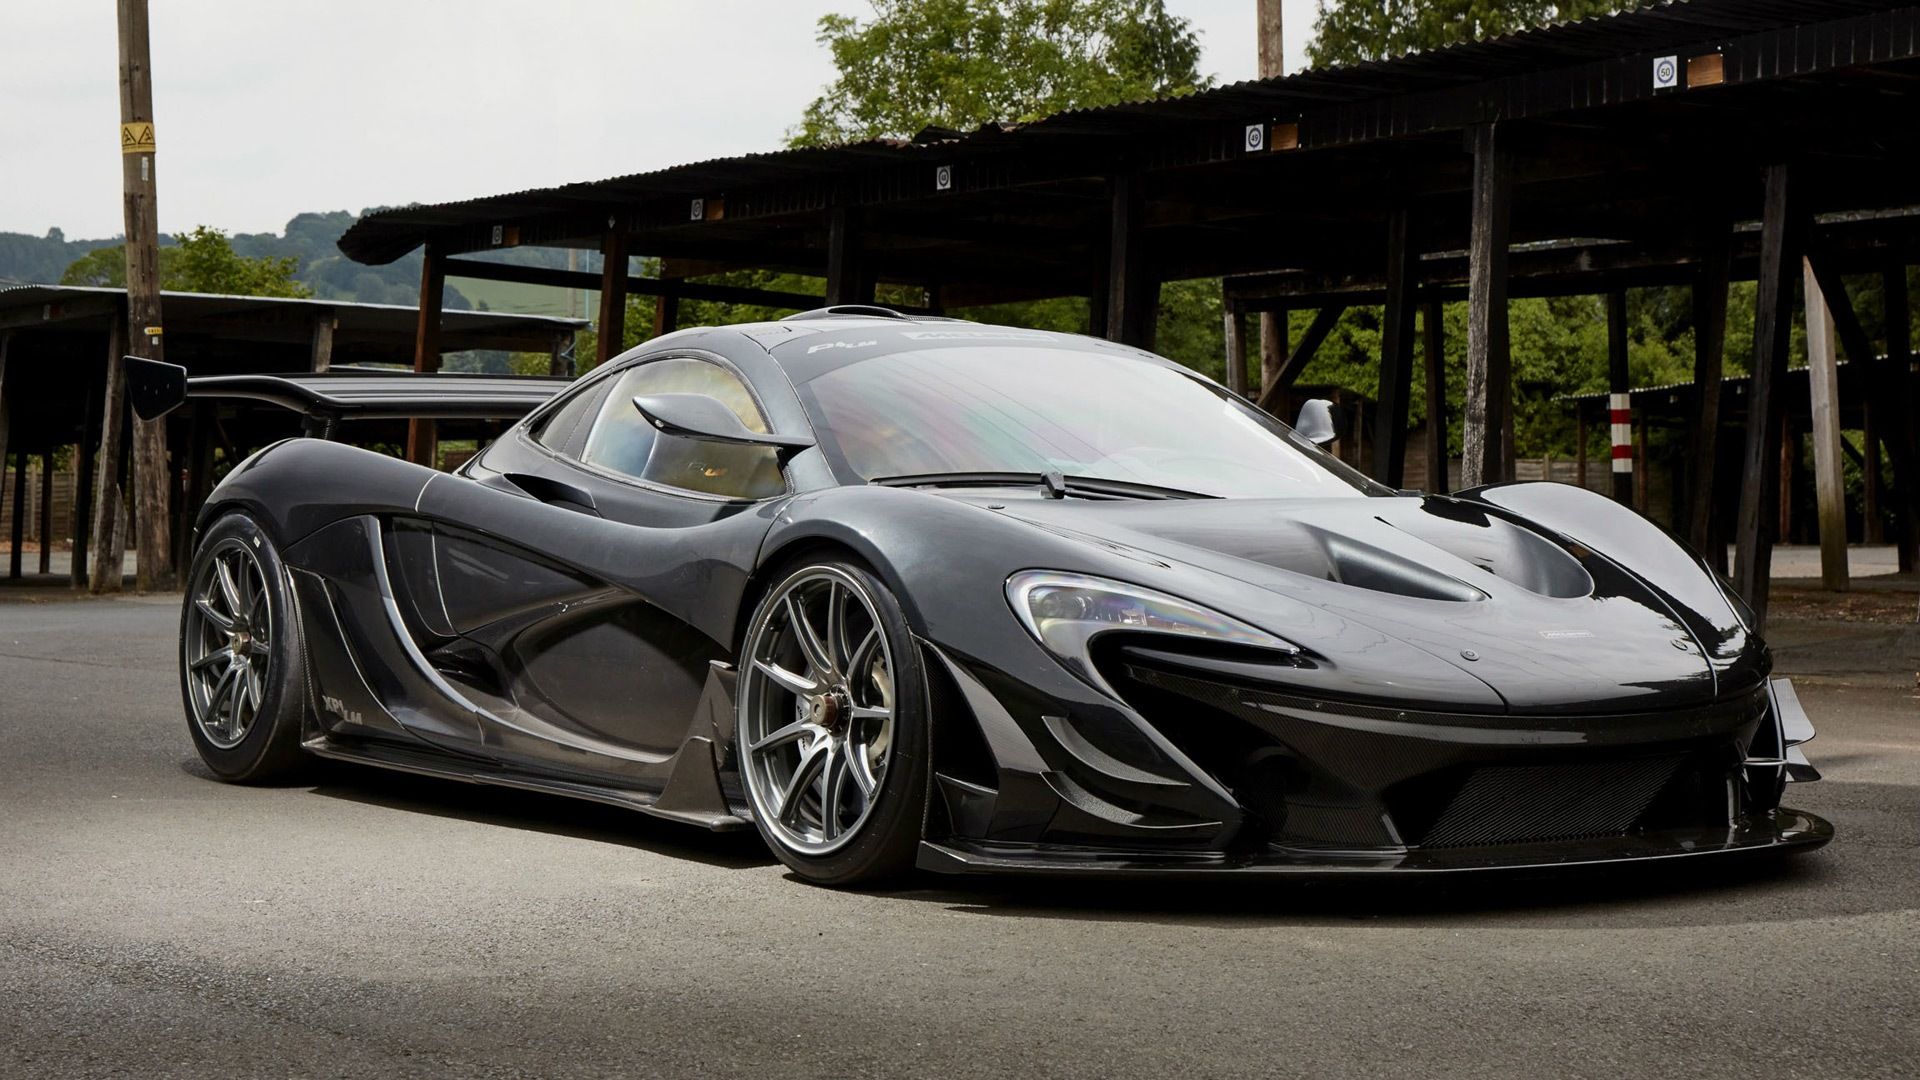 the Lanzante P1 LM lapped the famous Nürburgring in a mere six minutes and 43.22 seconds